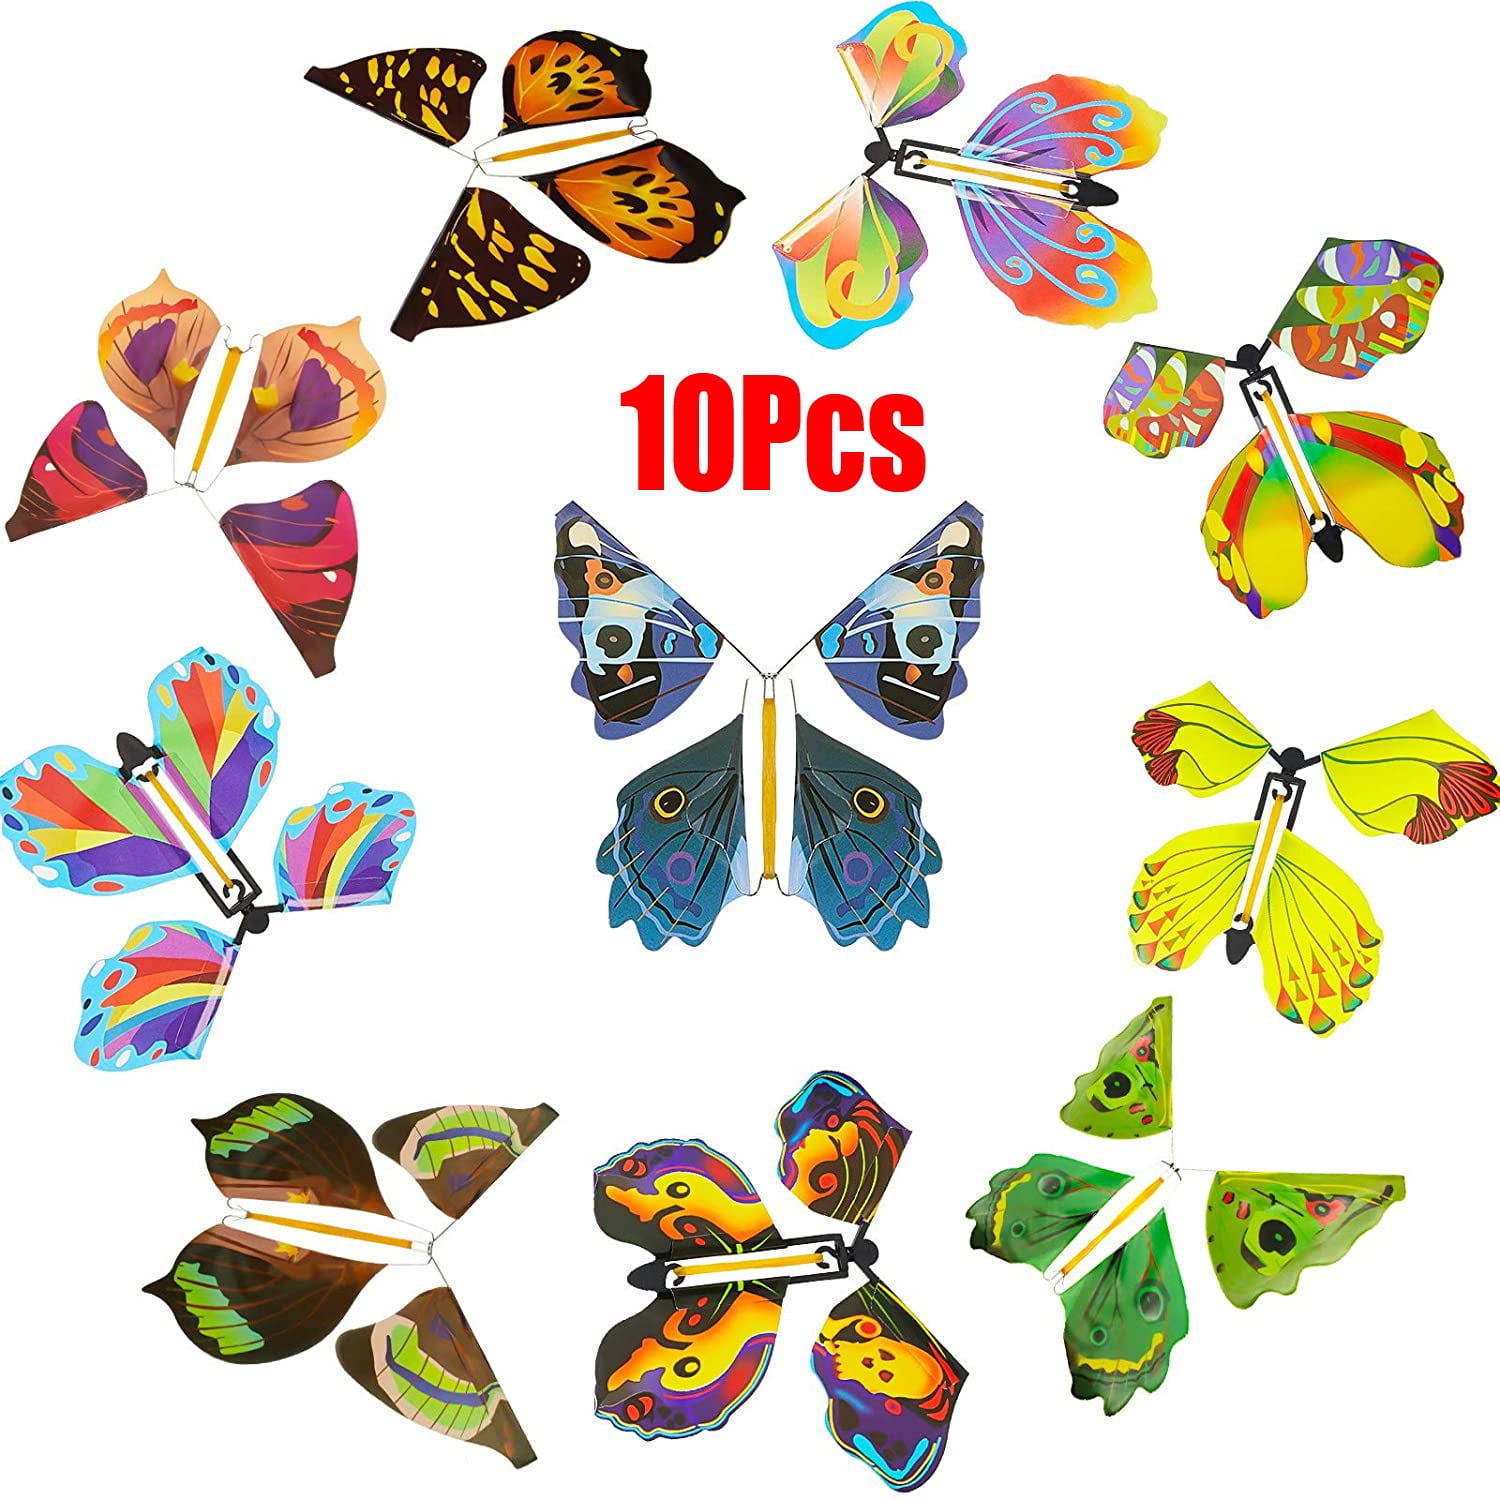 TOTAMALA 15 Pack Novelty Magic Flying Butterfly Surprise Box Greeting Card Hidden Flying Colorful Butterflies Rubber Band Powered Wind up Butterfly Toy for Wedding Party